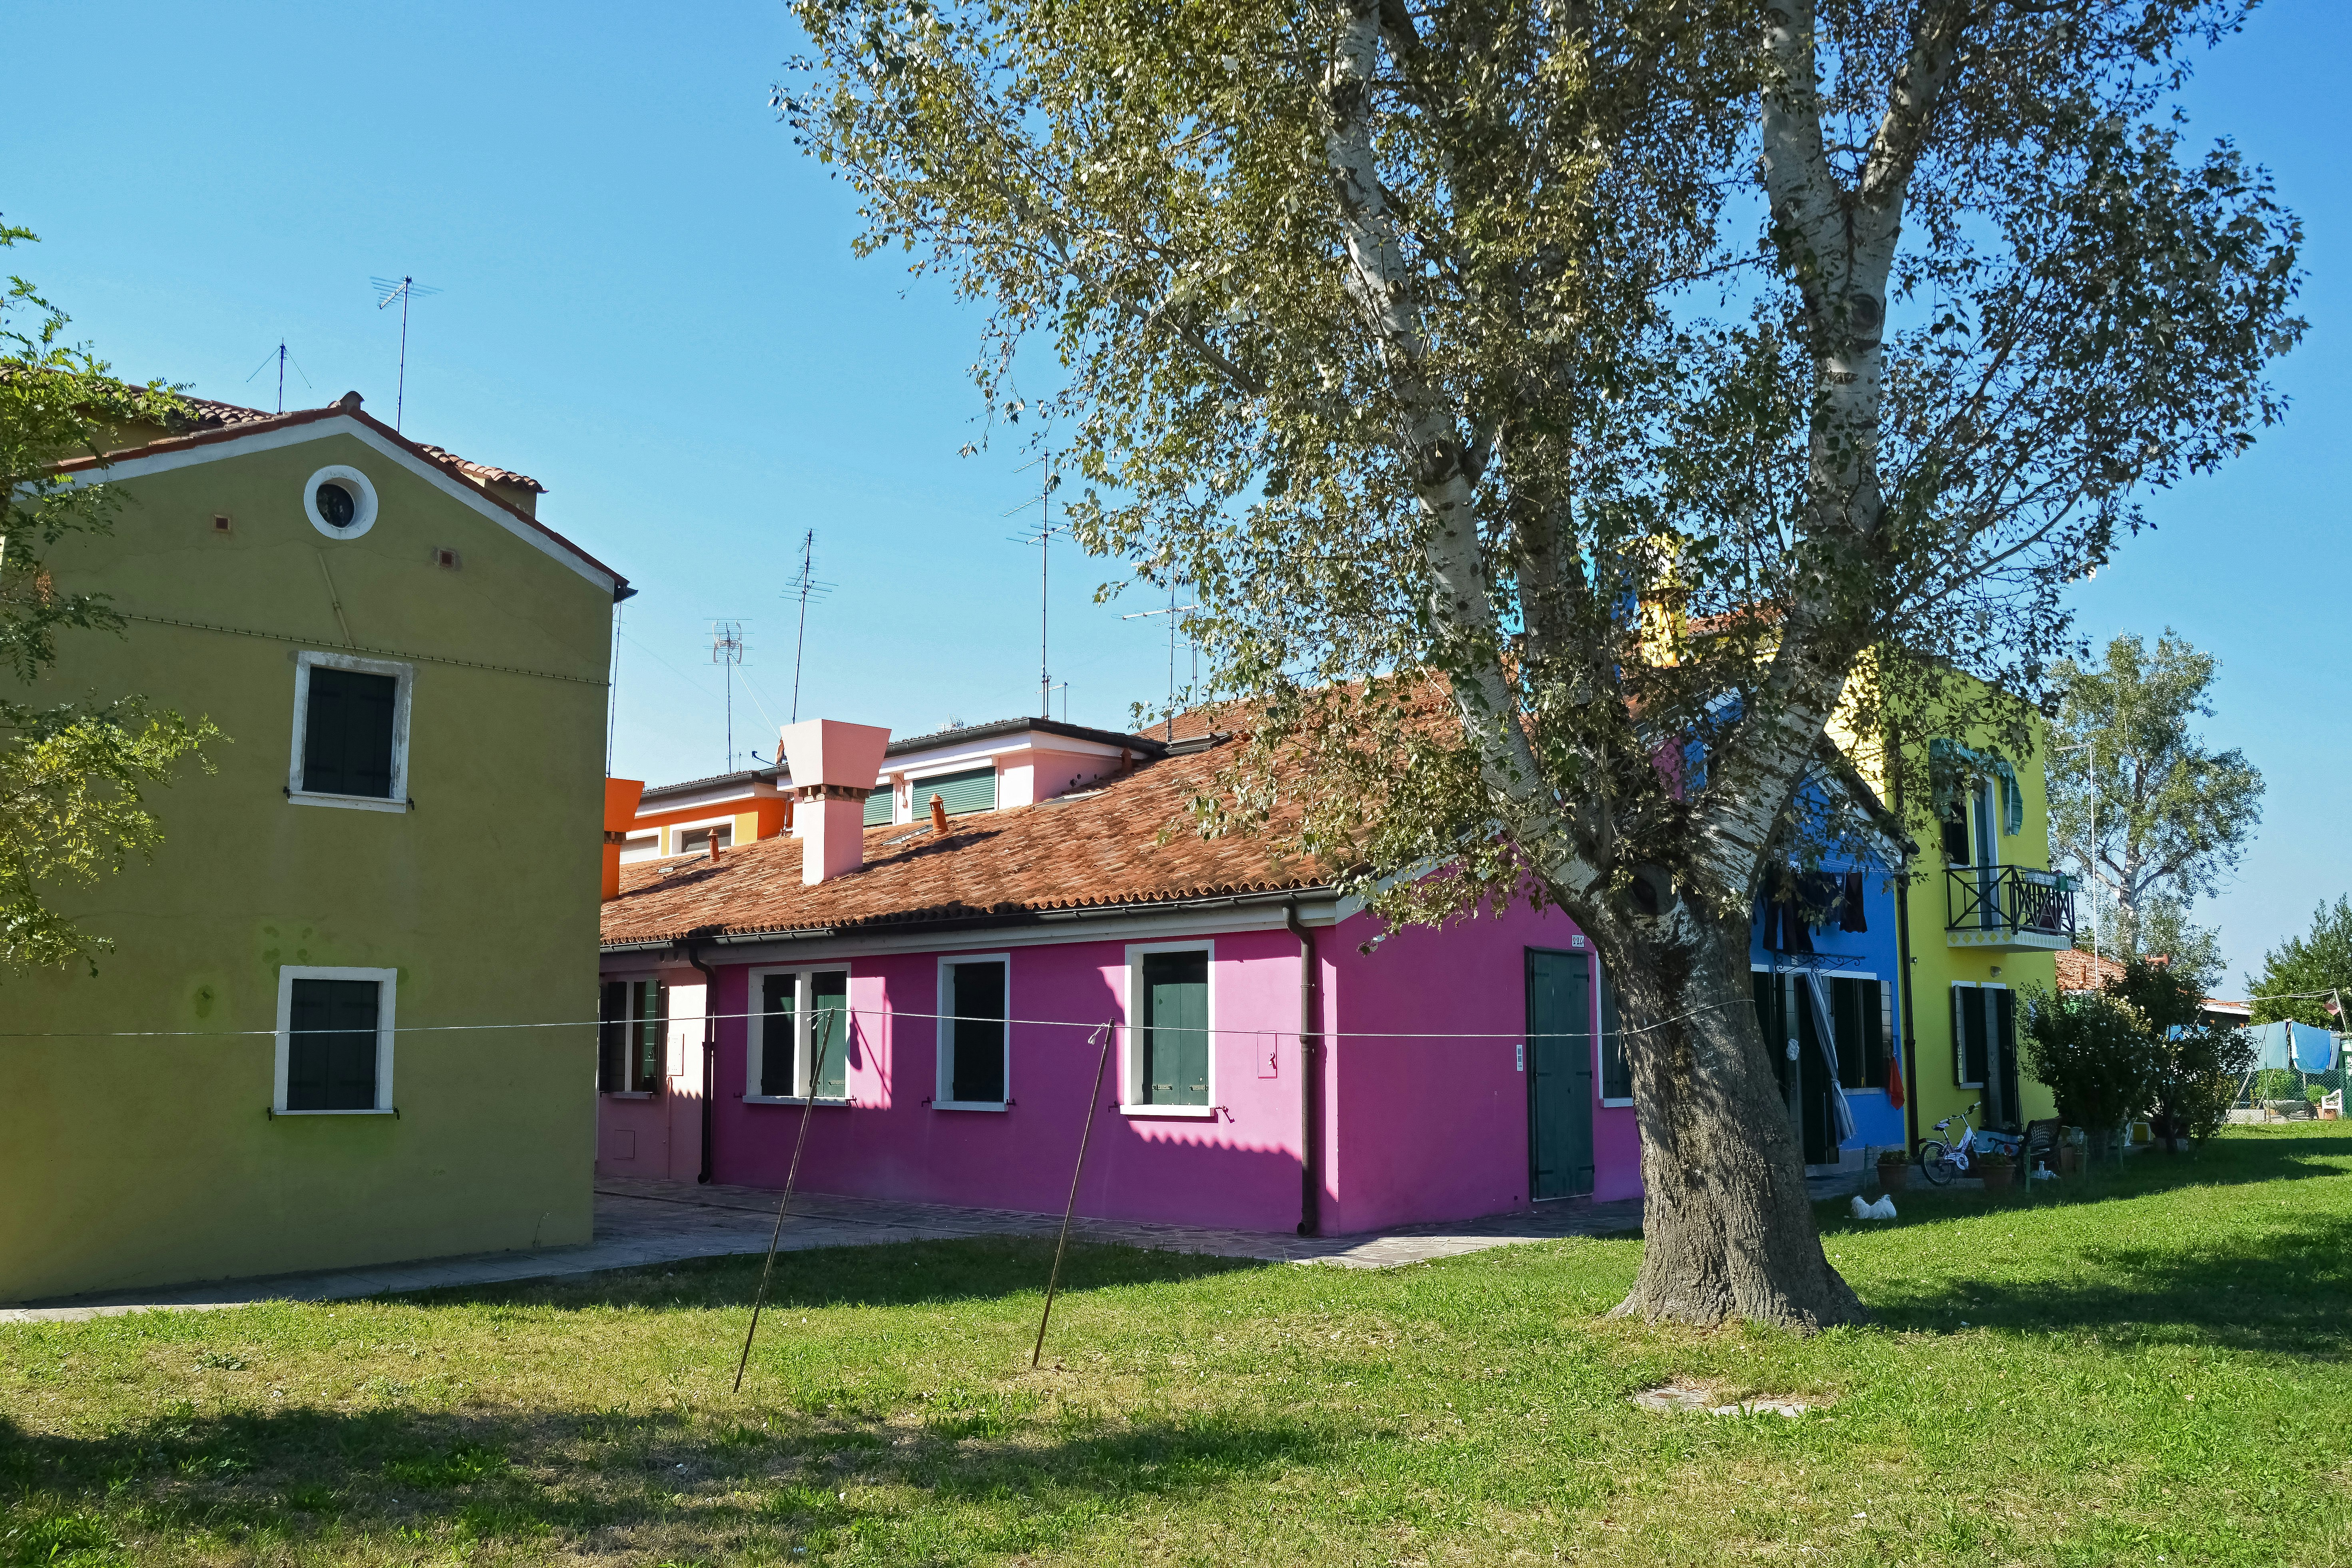 pink and white concrete house near green tree during daytime